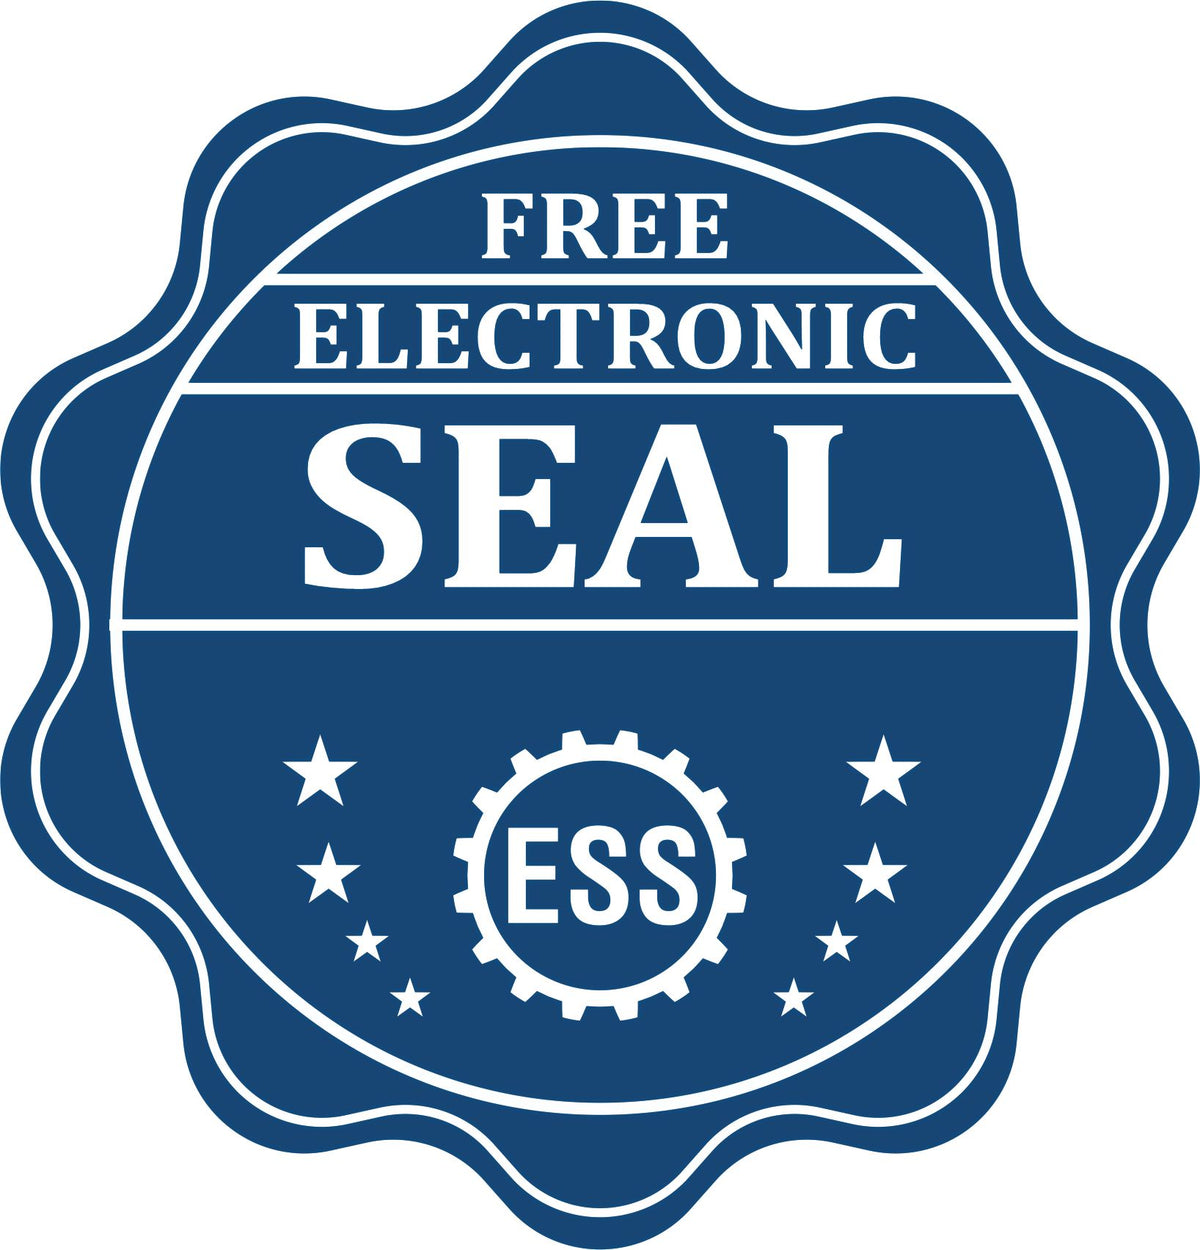 A badge showing a free electronic seal for the Gift Delaware Engineer Seal with stars and the ESS gear on the emblem.